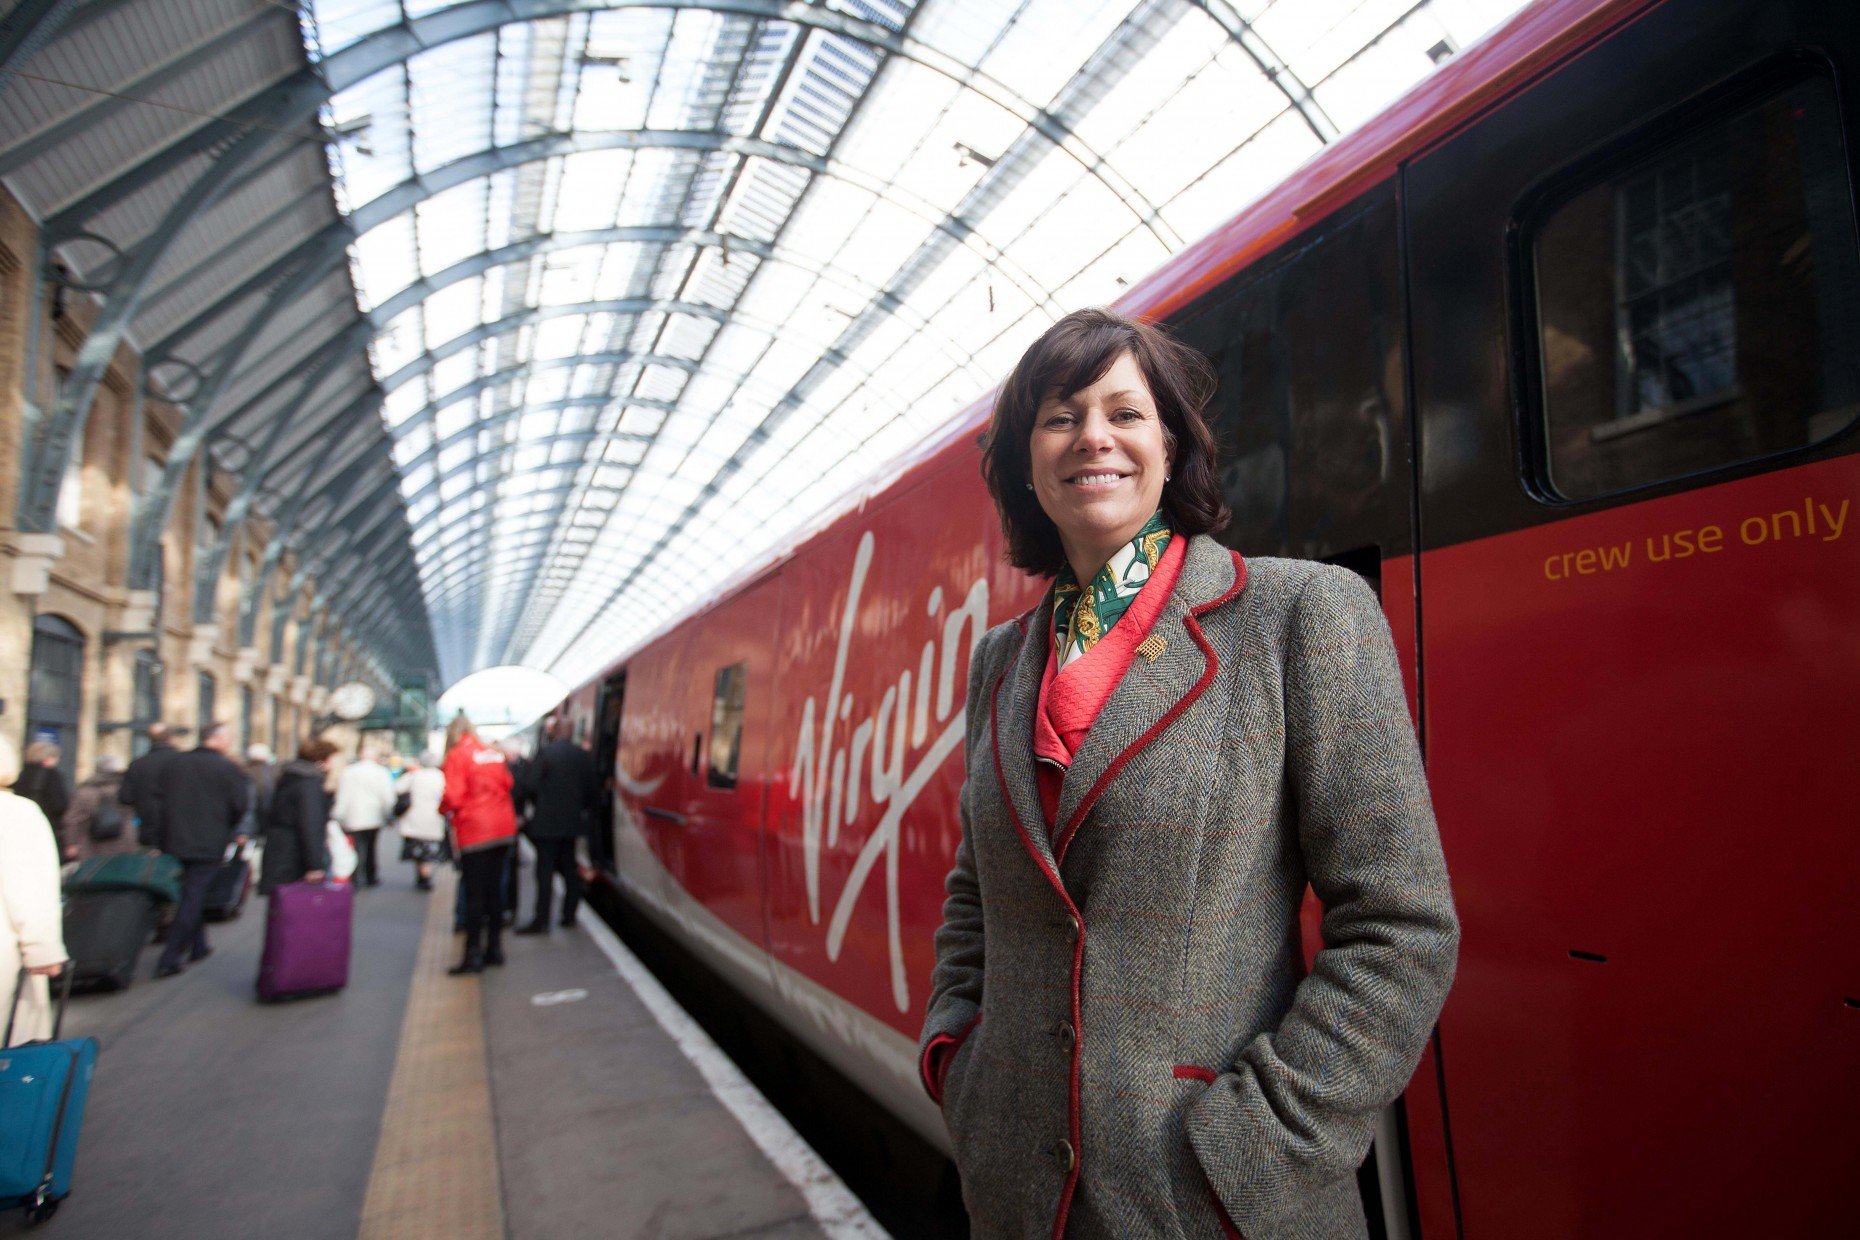 Rail Minister Claire Perry with the first train to carry the new Virgin Trains East Coast livery at London King's Cross station.